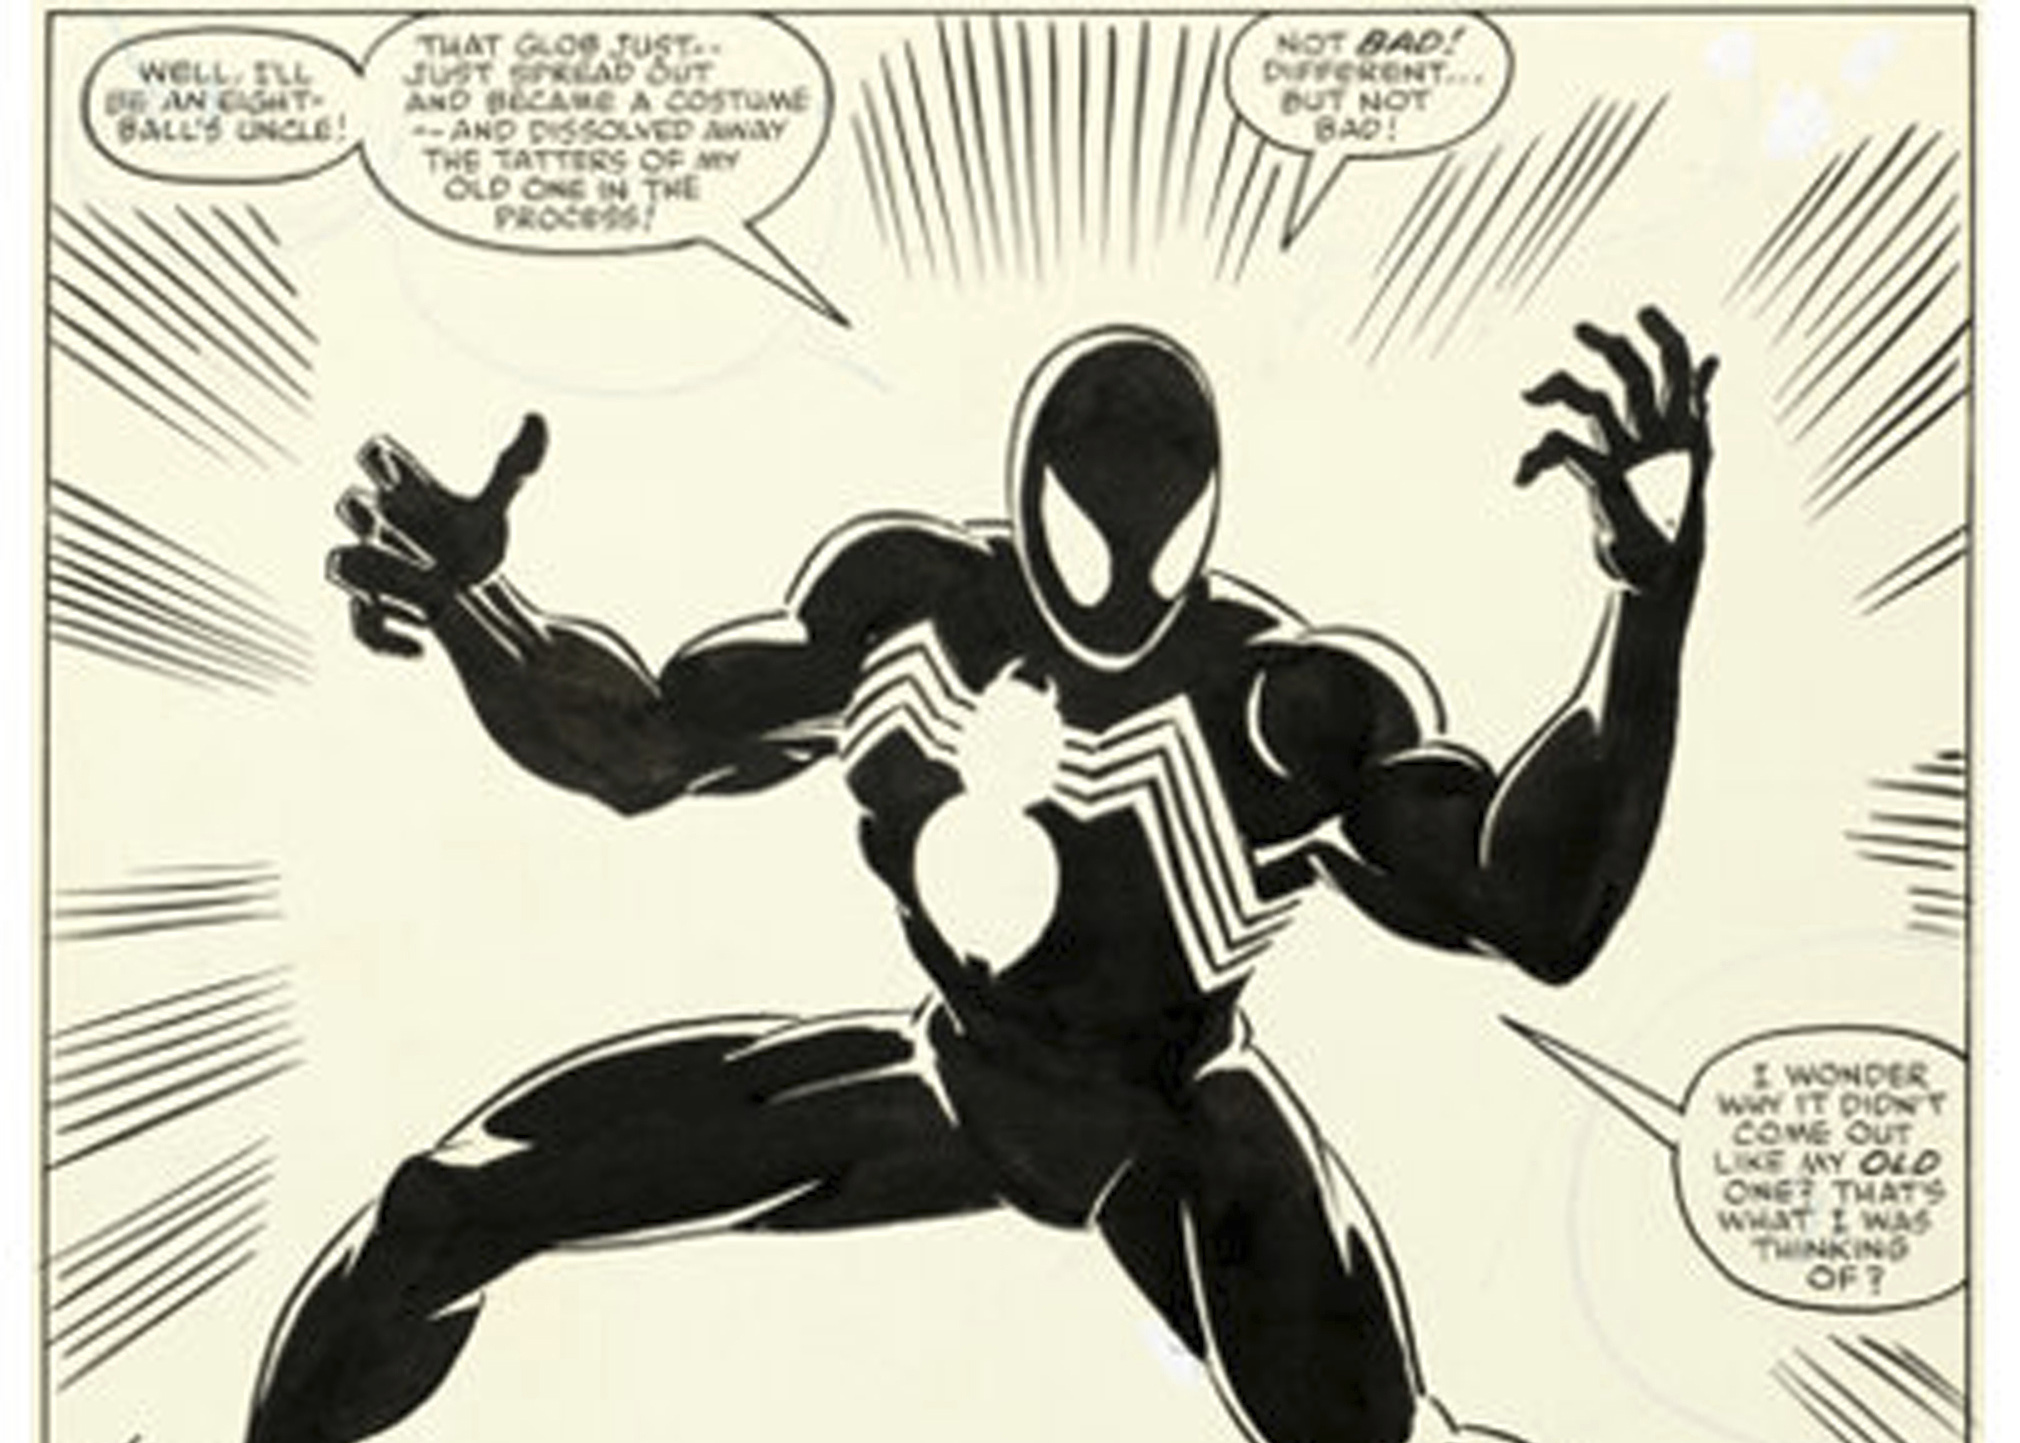 Spider-Man comic page sells for record £2.44m